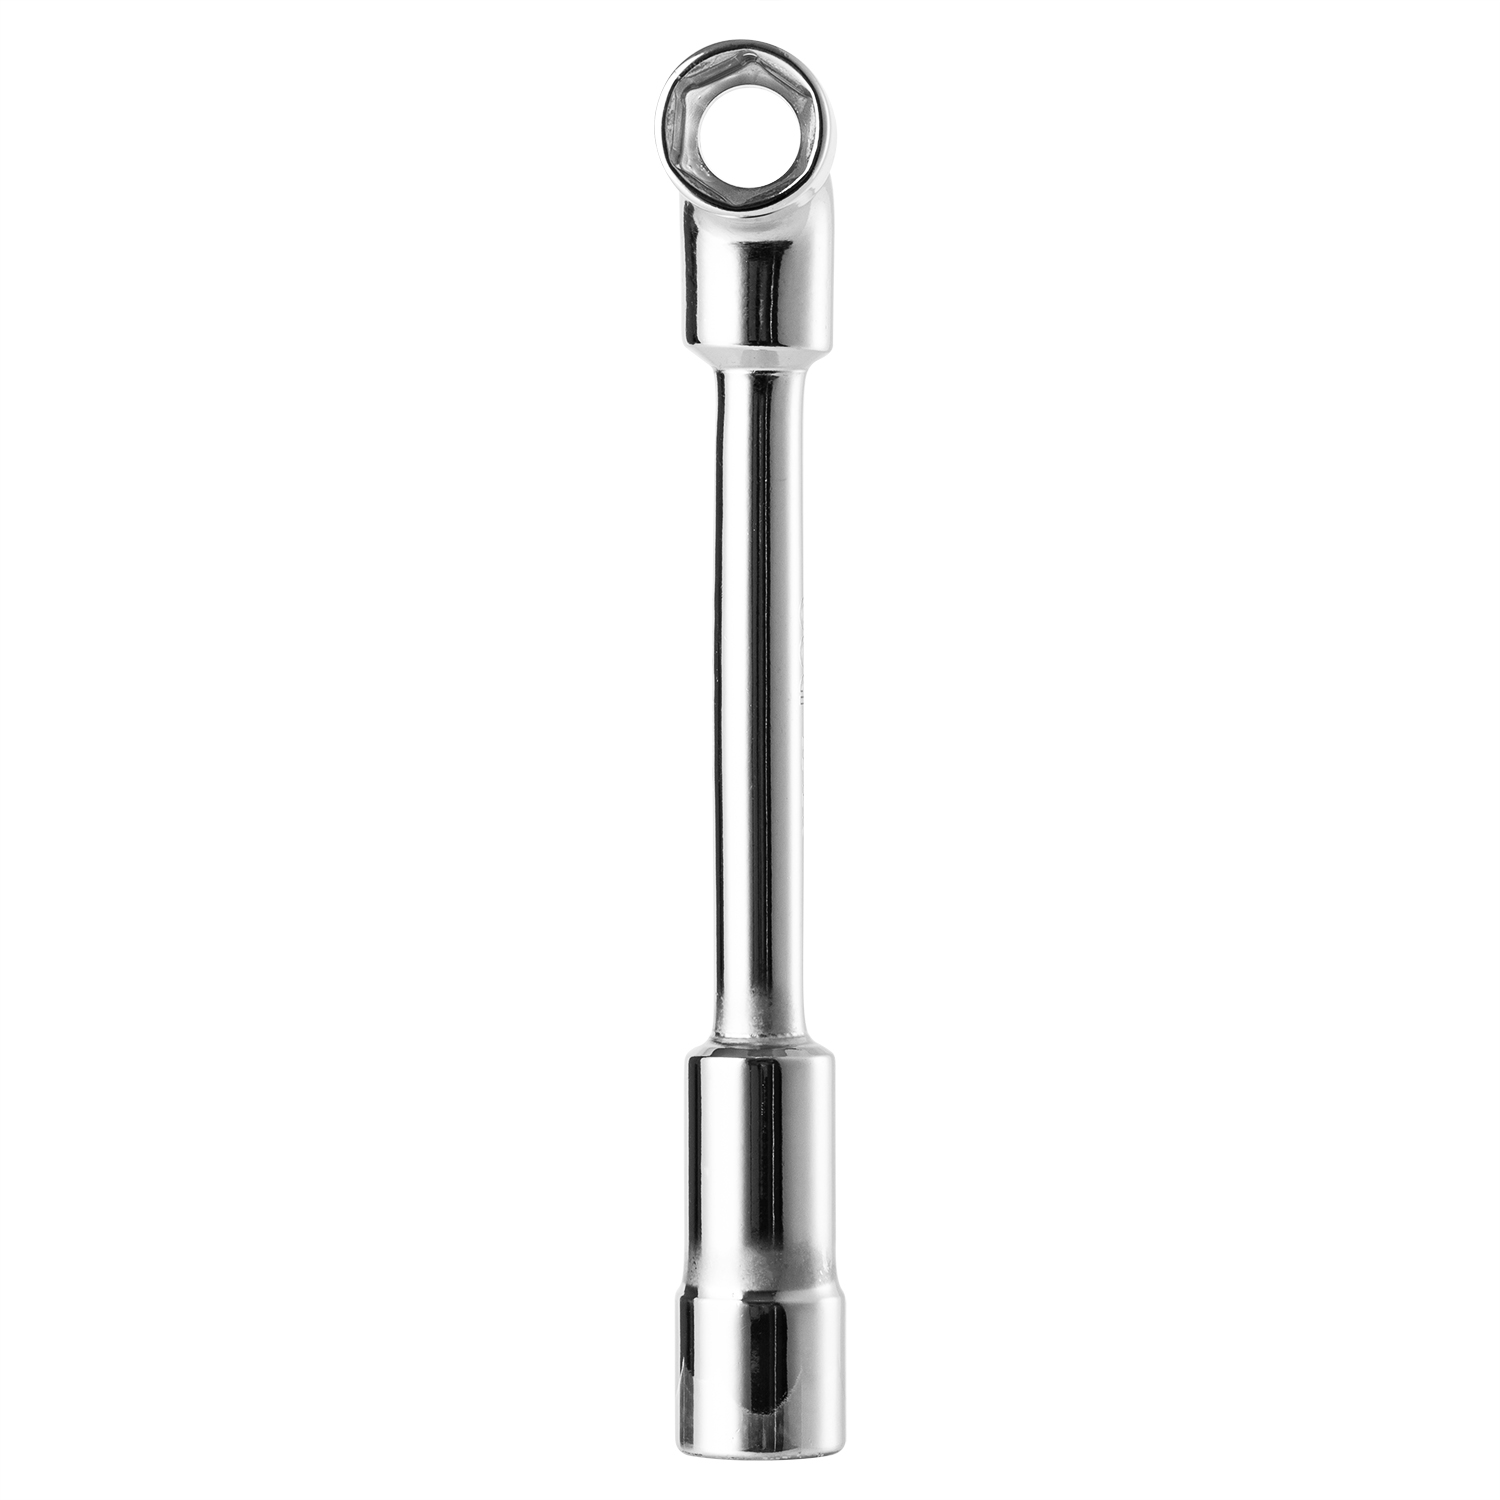 19mm L-Angled socket wrench